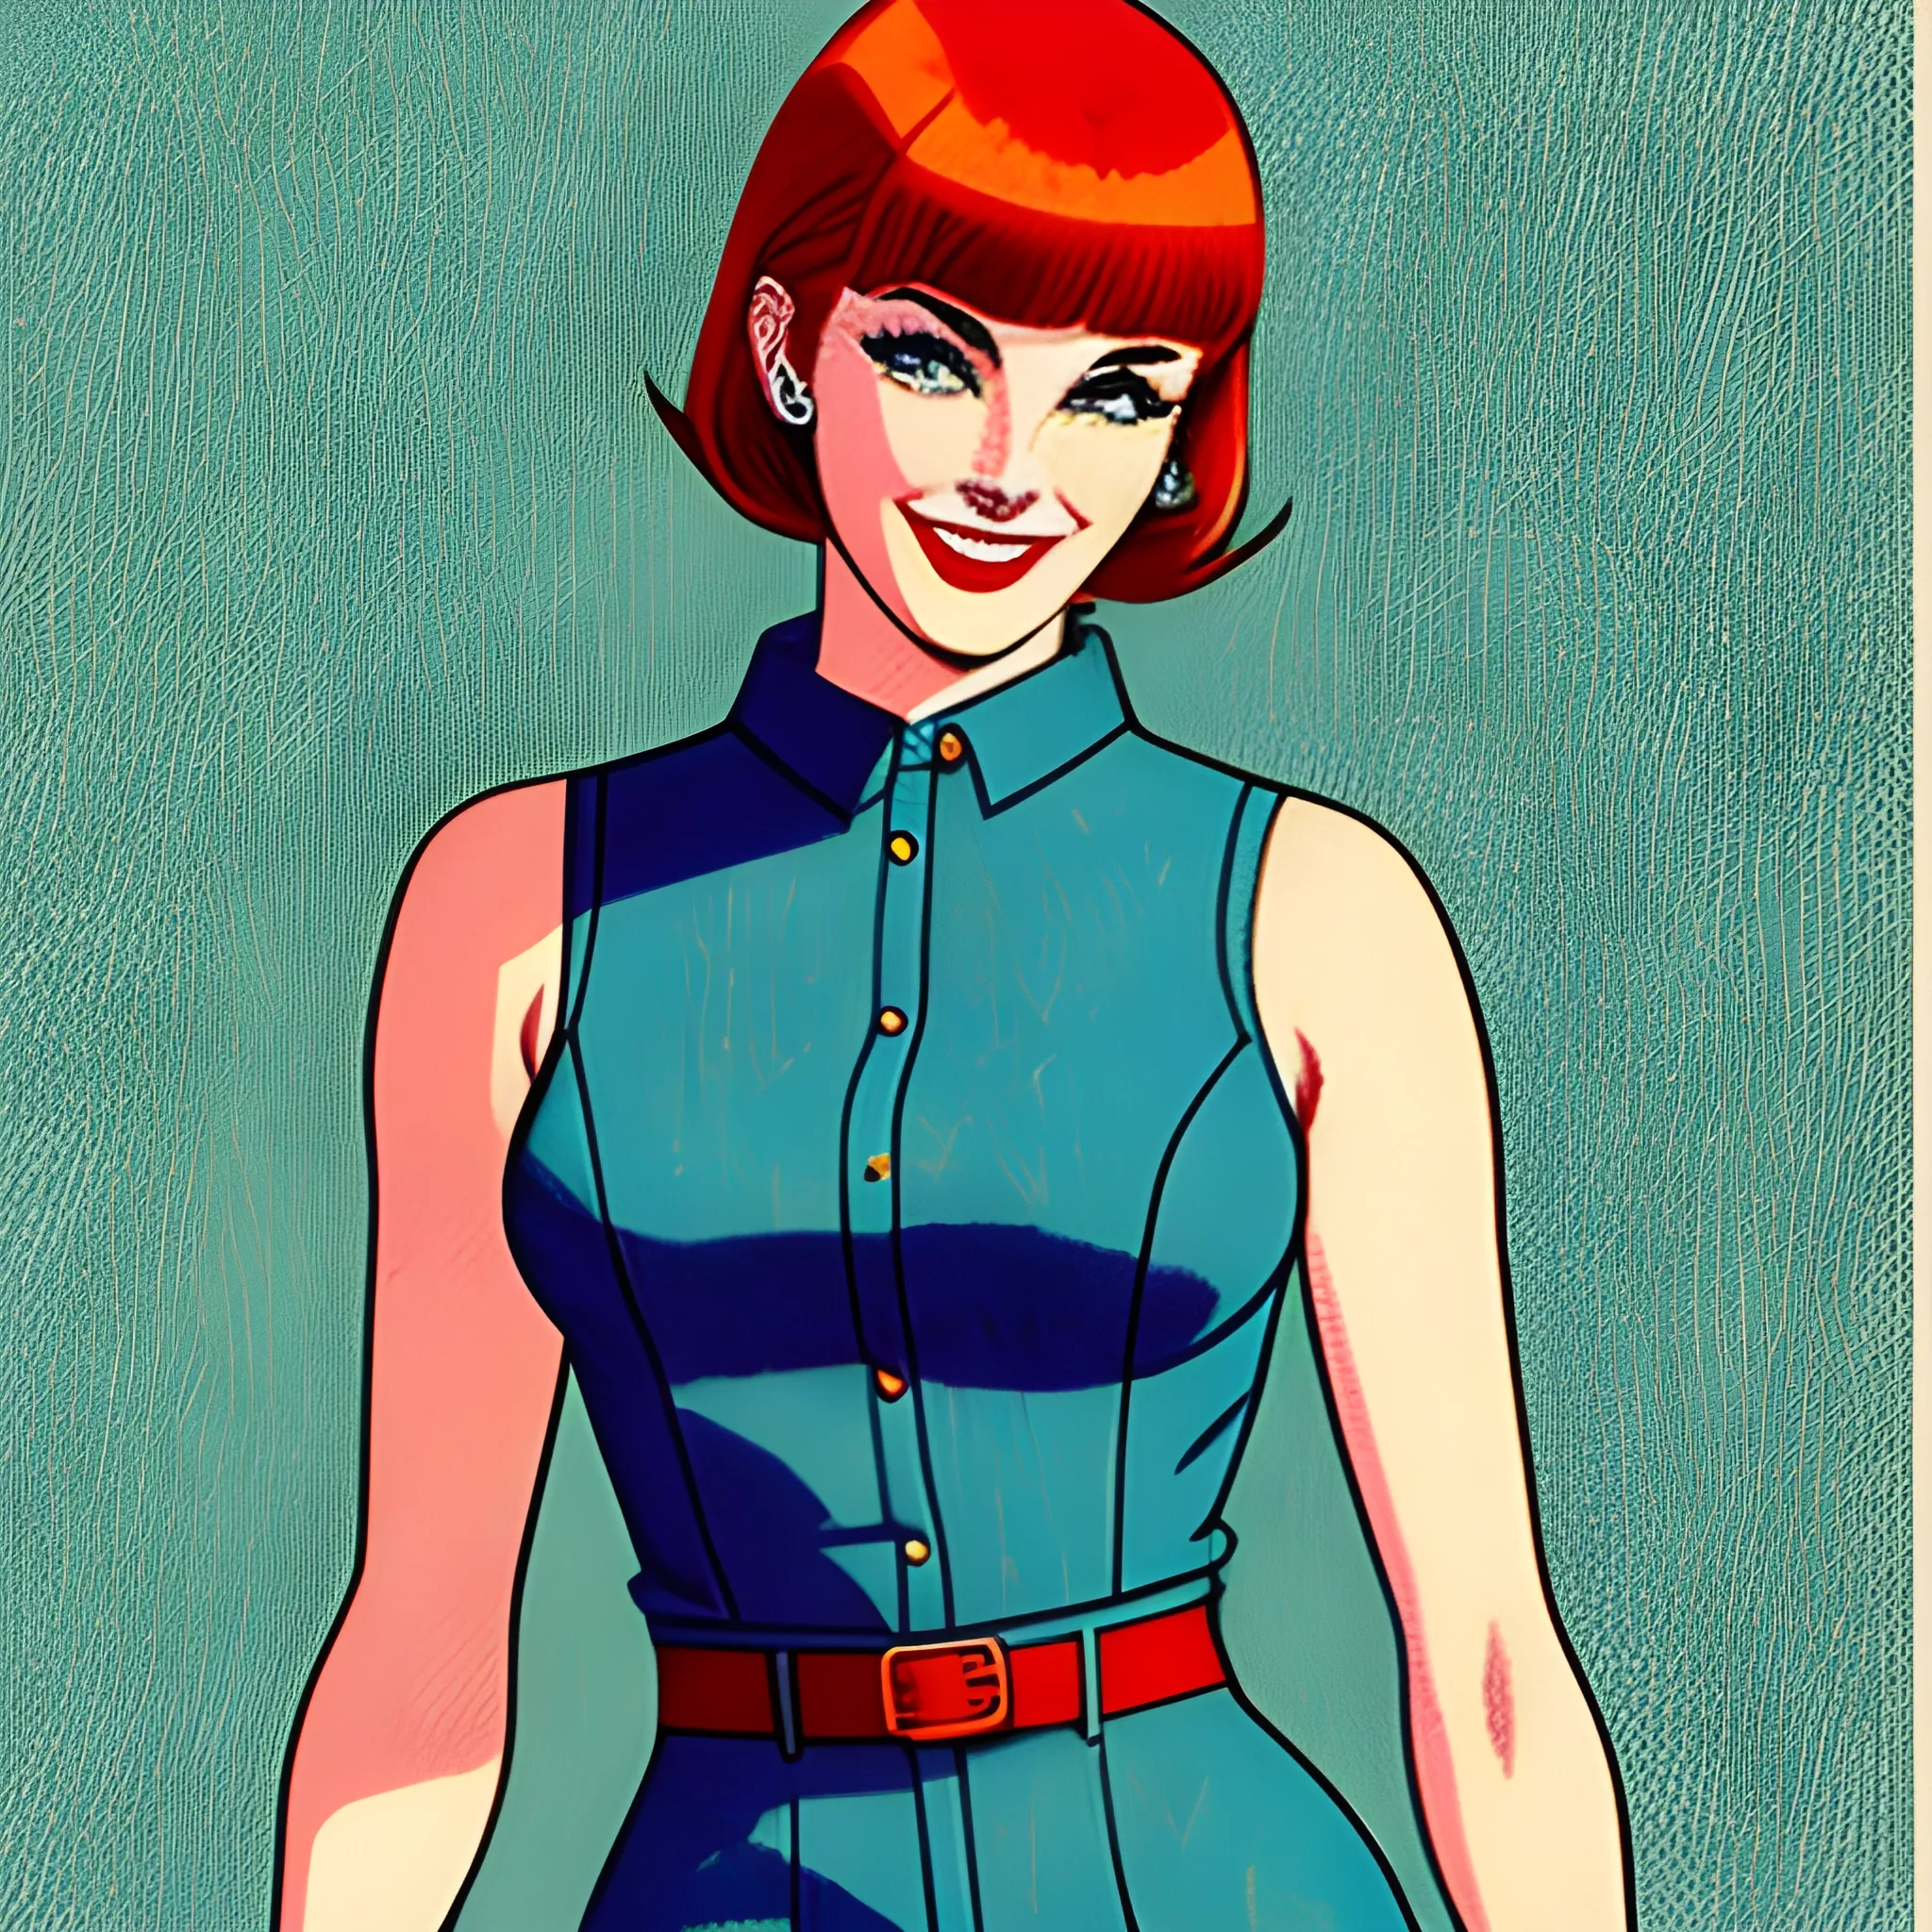 short haired red head college girl with bangs, wearing 1960's clothing, early 20's, smiling, drawn in Jean Giraud art style, full body shots